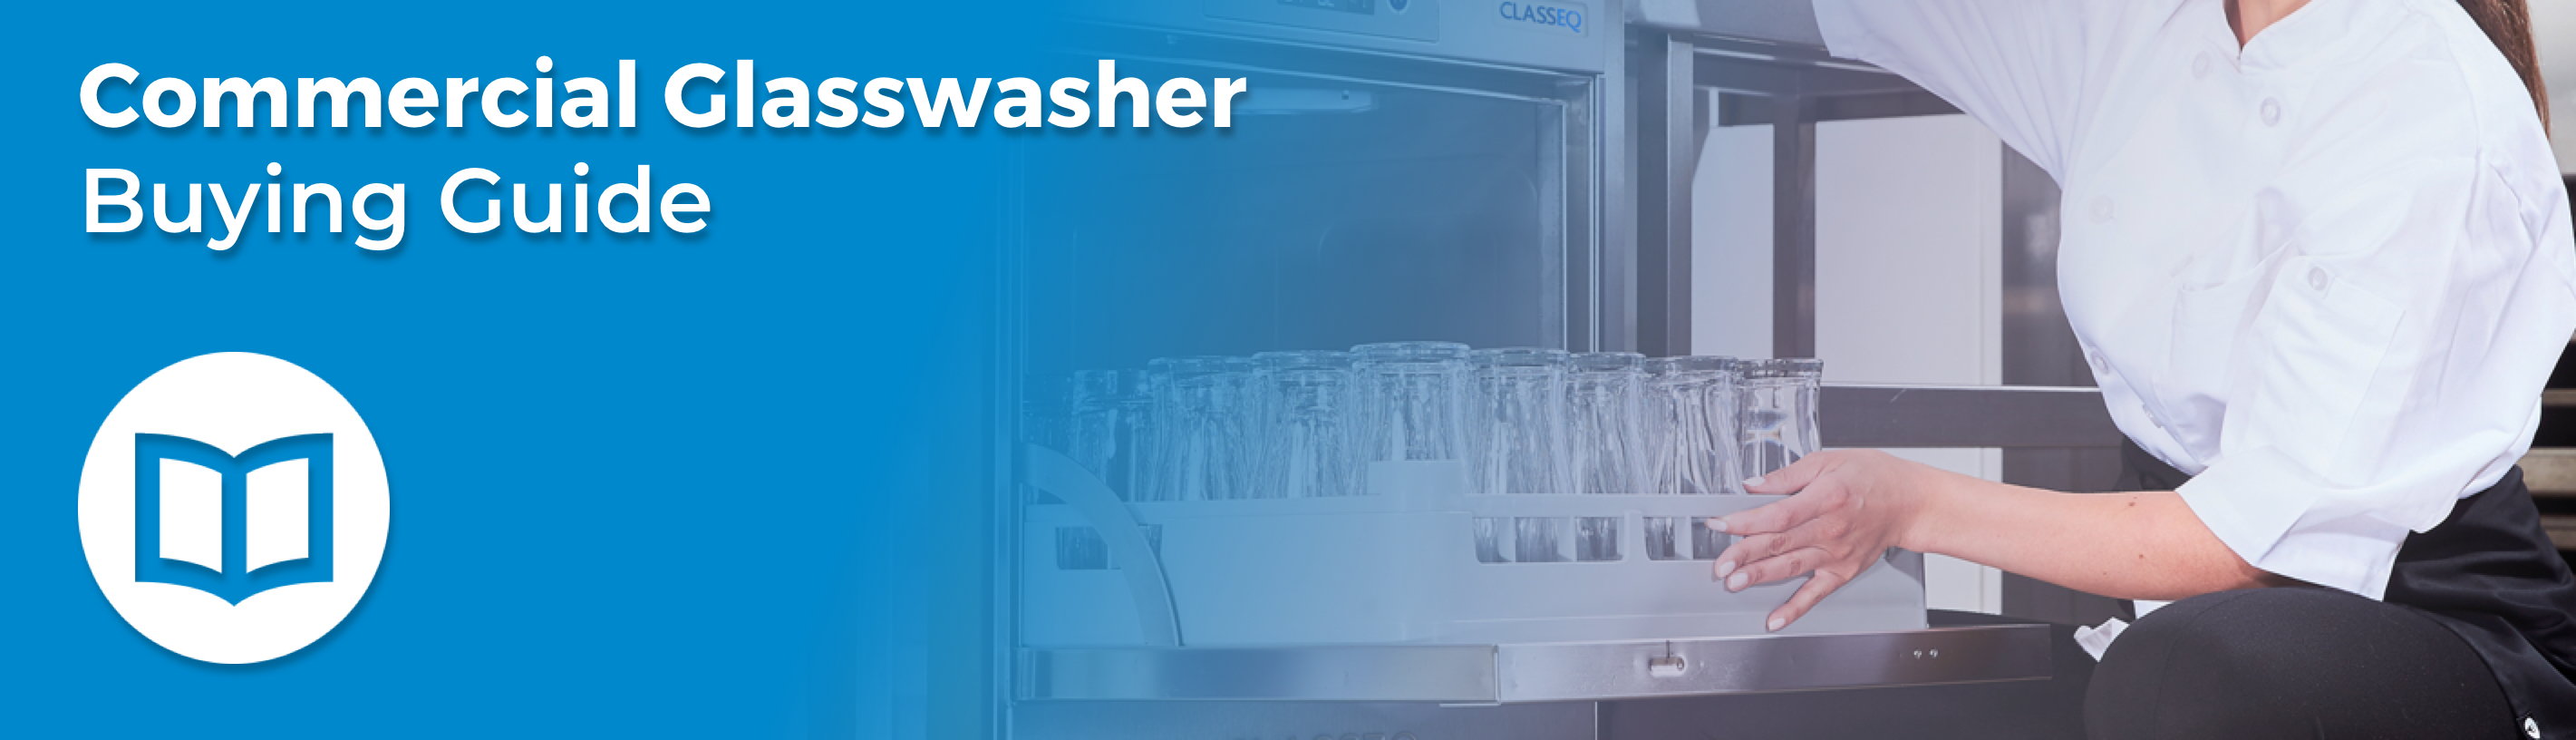 Commercial Glasswasher Buying Guide